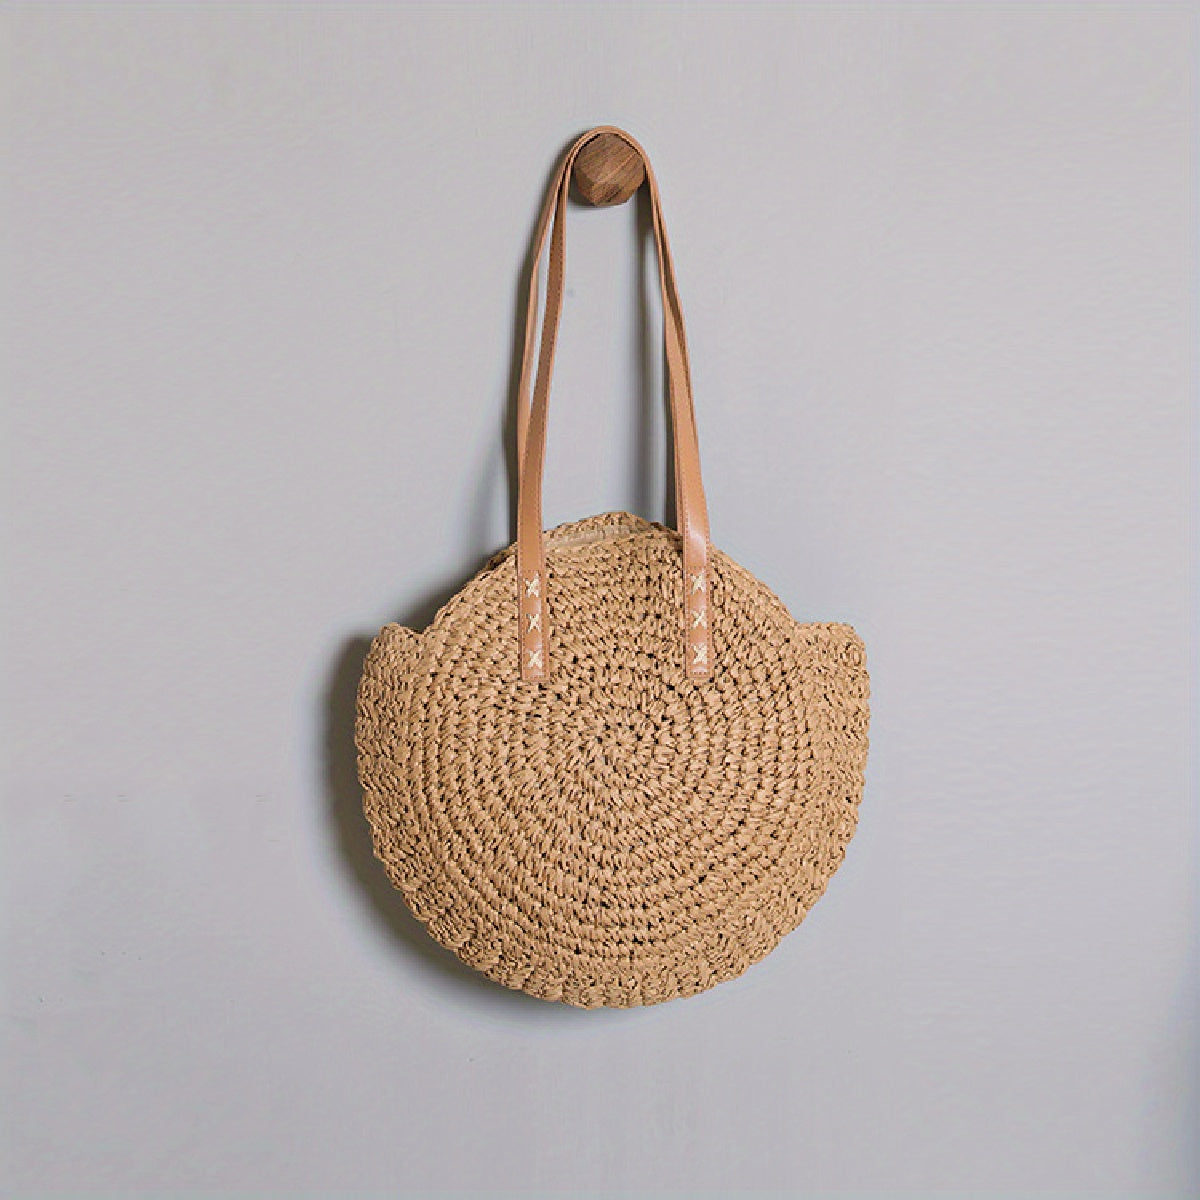 Woven Straw Round Handbags - Hollow Out Summer Beach Large Capacity Bag